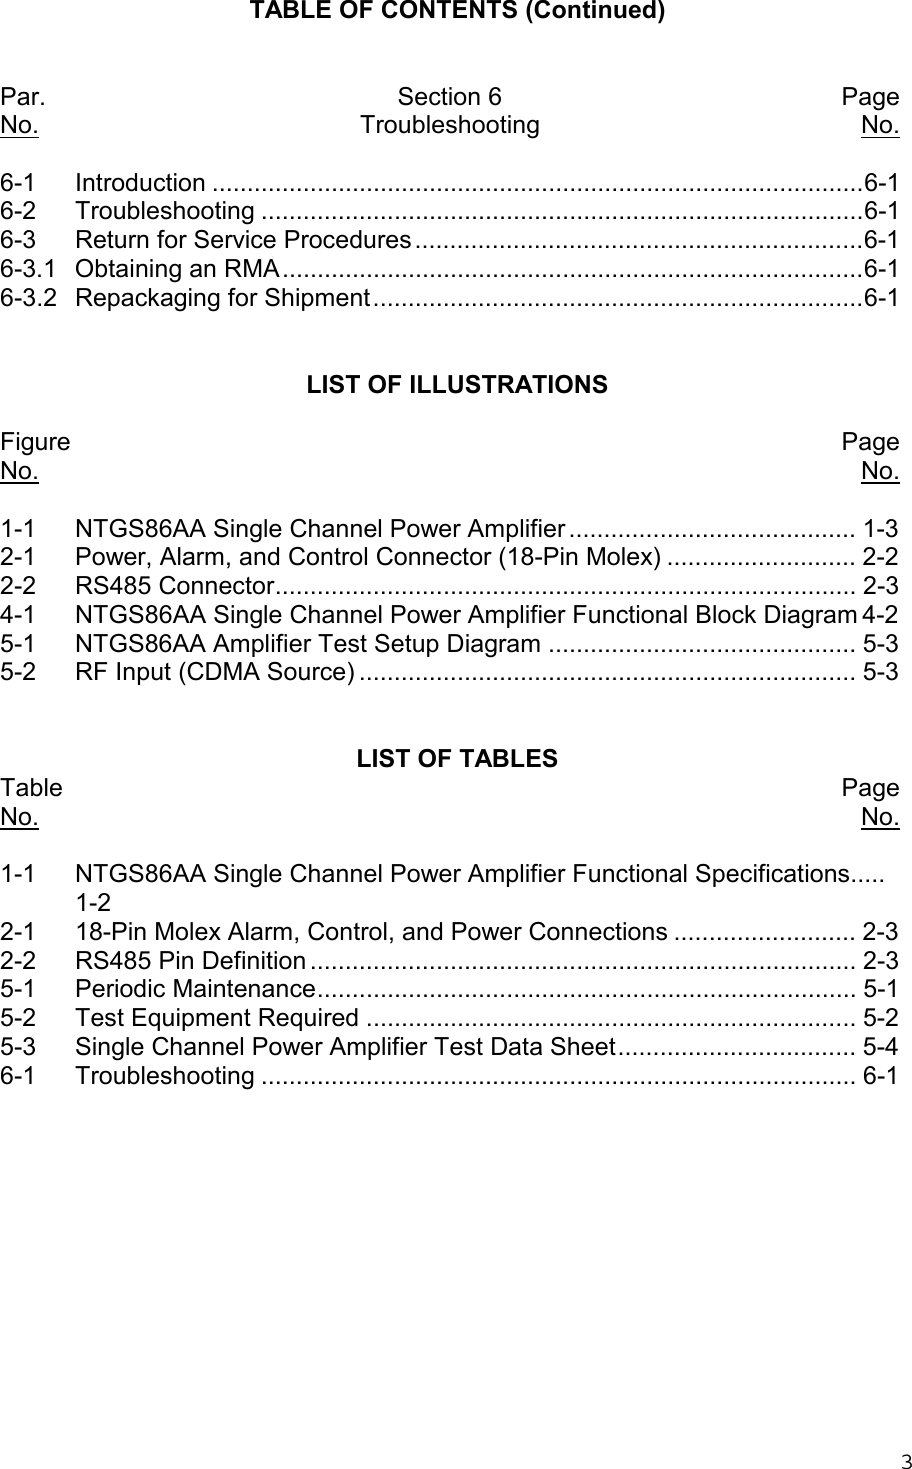 3TABLE OF CONTENTS (Continued)Par. Section 6 PageNo. Troubleshooting No.6-1 Introduction .............................................................................................6-16-2 Troubleshooting ......................................................................................6-16-3 Return for Service Procedures................................................................6-16-3.1 Obtaining an RMA...................................................................................6-16-3.2 Repackaging for Shipment......................................................................6-1LIST OF ILLUSTRATIONSFigure PageNo. No.1-1 NTGS86AA Single Channel Power Amplifier ......................................... 1-32-1 Power, Alarm, and Control Connector (18-Pin Molex) ........................... 2-22-2 RS485 Connector................................................................................... 2-34-1 NTGS86AA Single Channel Power Amplifier Functional Block Diagram 4-25-1 NTGS86AA Amplifier Test Setup Diagram ............................................ 5-35-2 RF Input (CDMA Source) ....................................................................... 5-3LIST OF TABLESTable PageNo. No.1-1 NTGS86AA Single Channel Power Amplifier Functional Specifications.....1-22-1 18-Pin Molex Alarm, Control, and Power Connections .......................... 2-32-2 RS485 Pin Definition.............................................................................. 2-35-1 Periodic Maintenance............................................................................. 5-15-2 Test Equipment Required ...................................................................... 5-25-3 Single Channel Power Amplifier Test Data Sheet.................................. 5-46-1 Troubleshooting ..................................................................................... 6-1